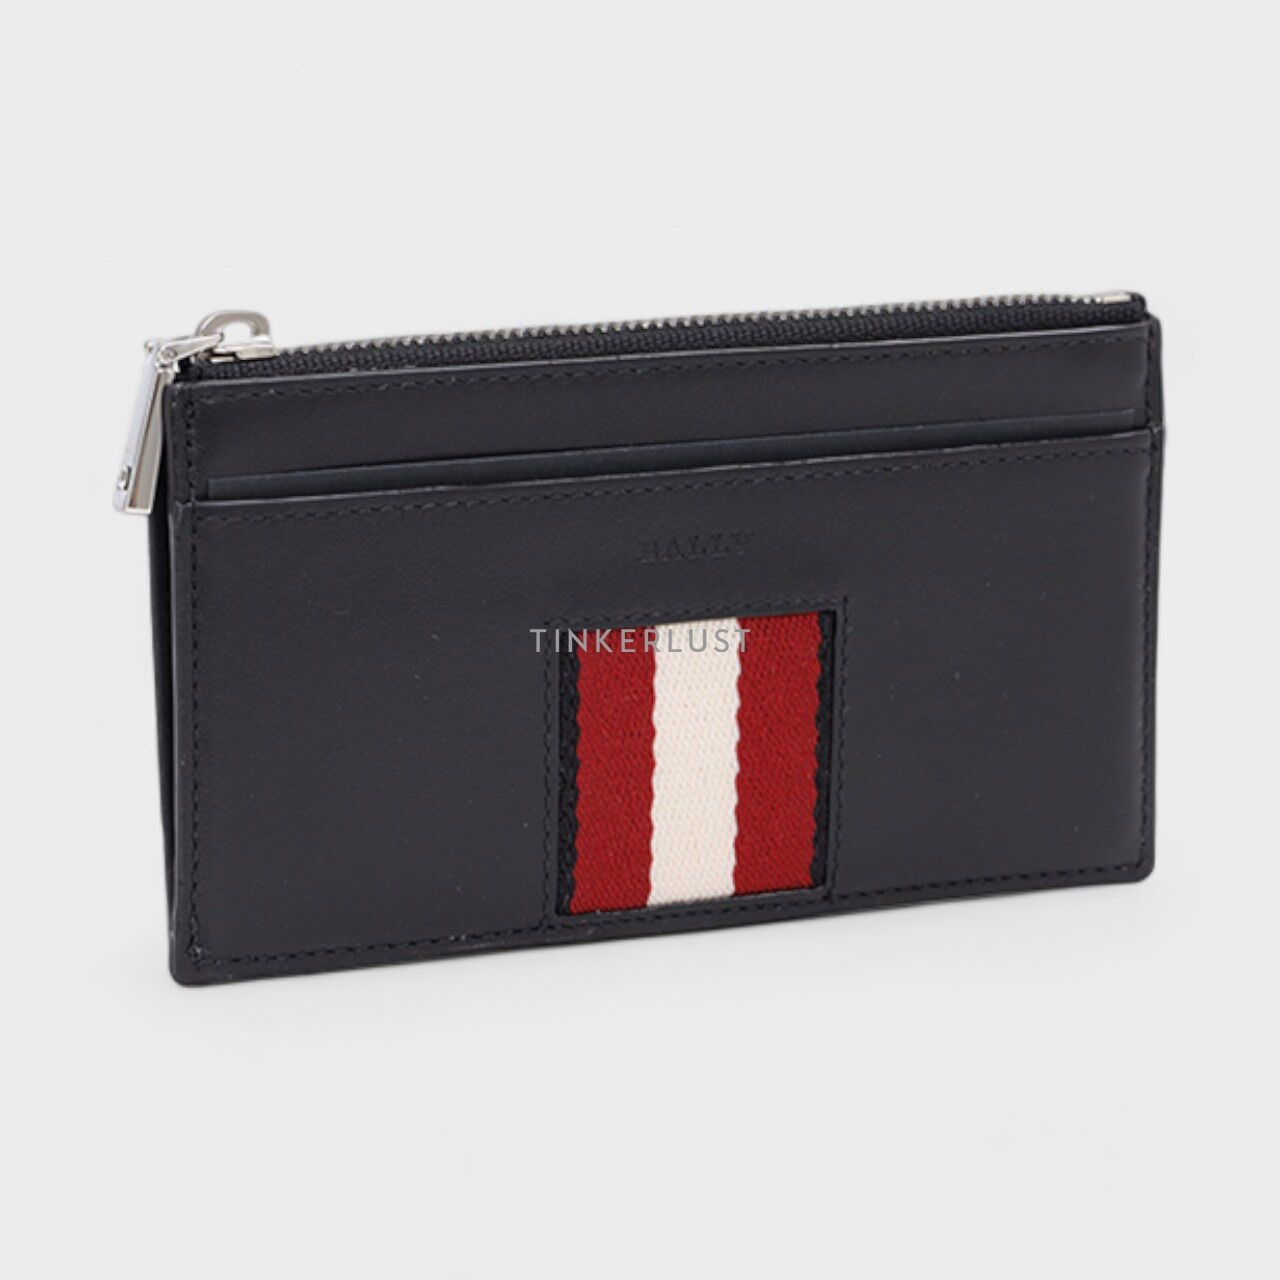 Bally Bythom Business Card Holder in Black with Red/White Stripe Wallet